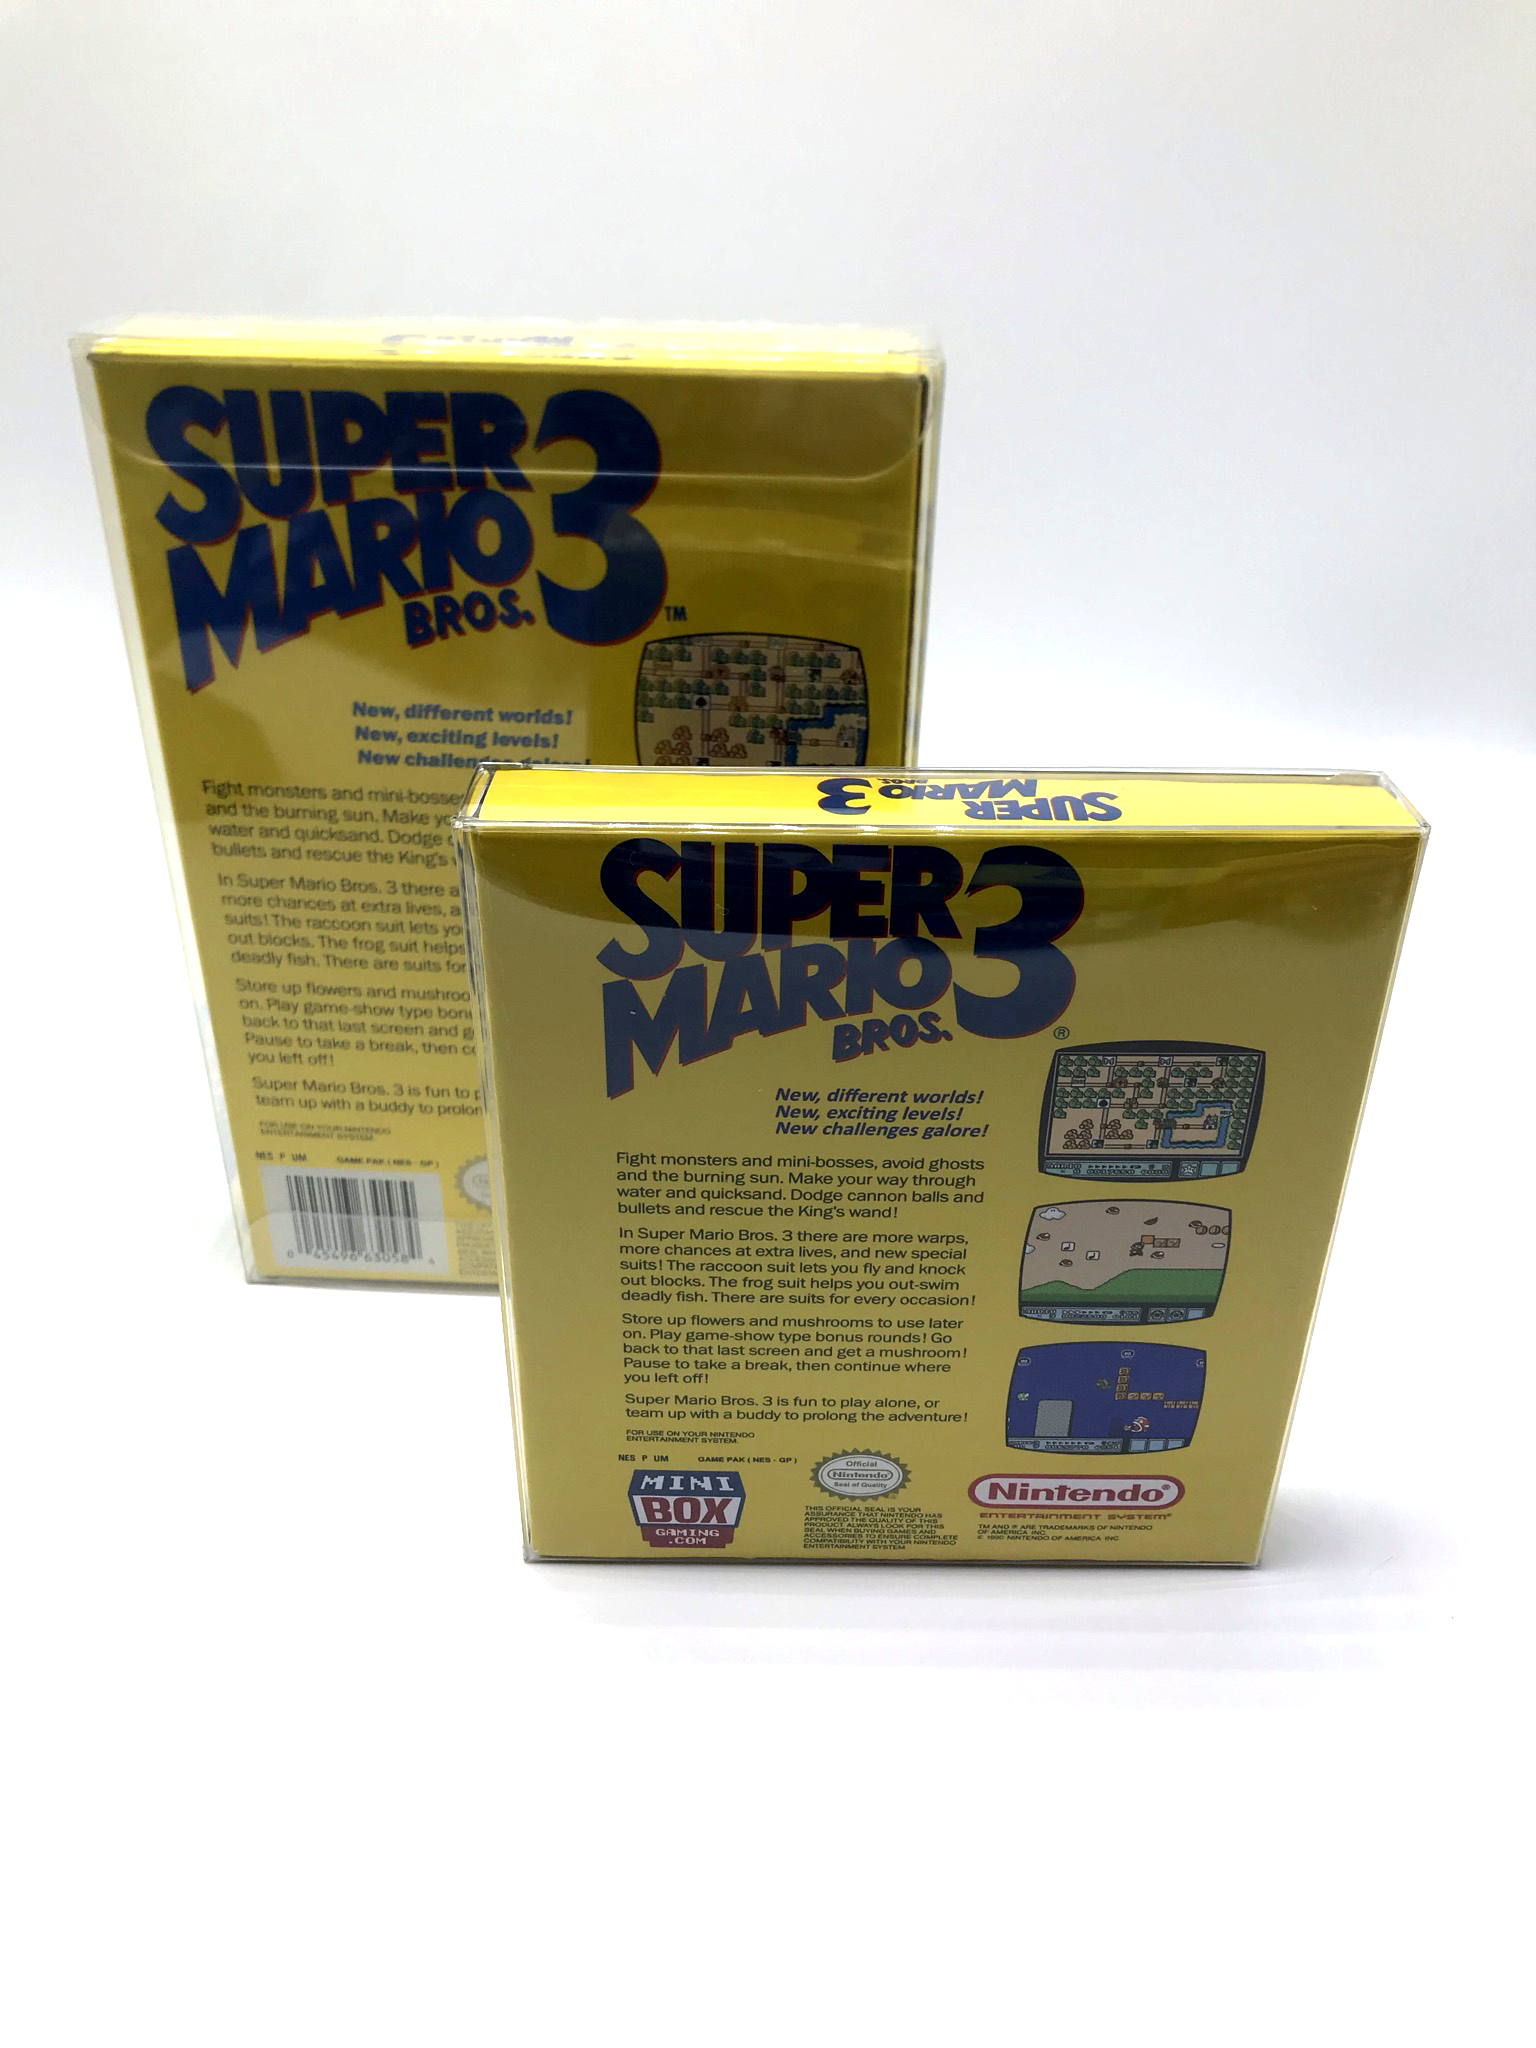 Kirby Super Star boxBox My Games! Reproduction game boxes